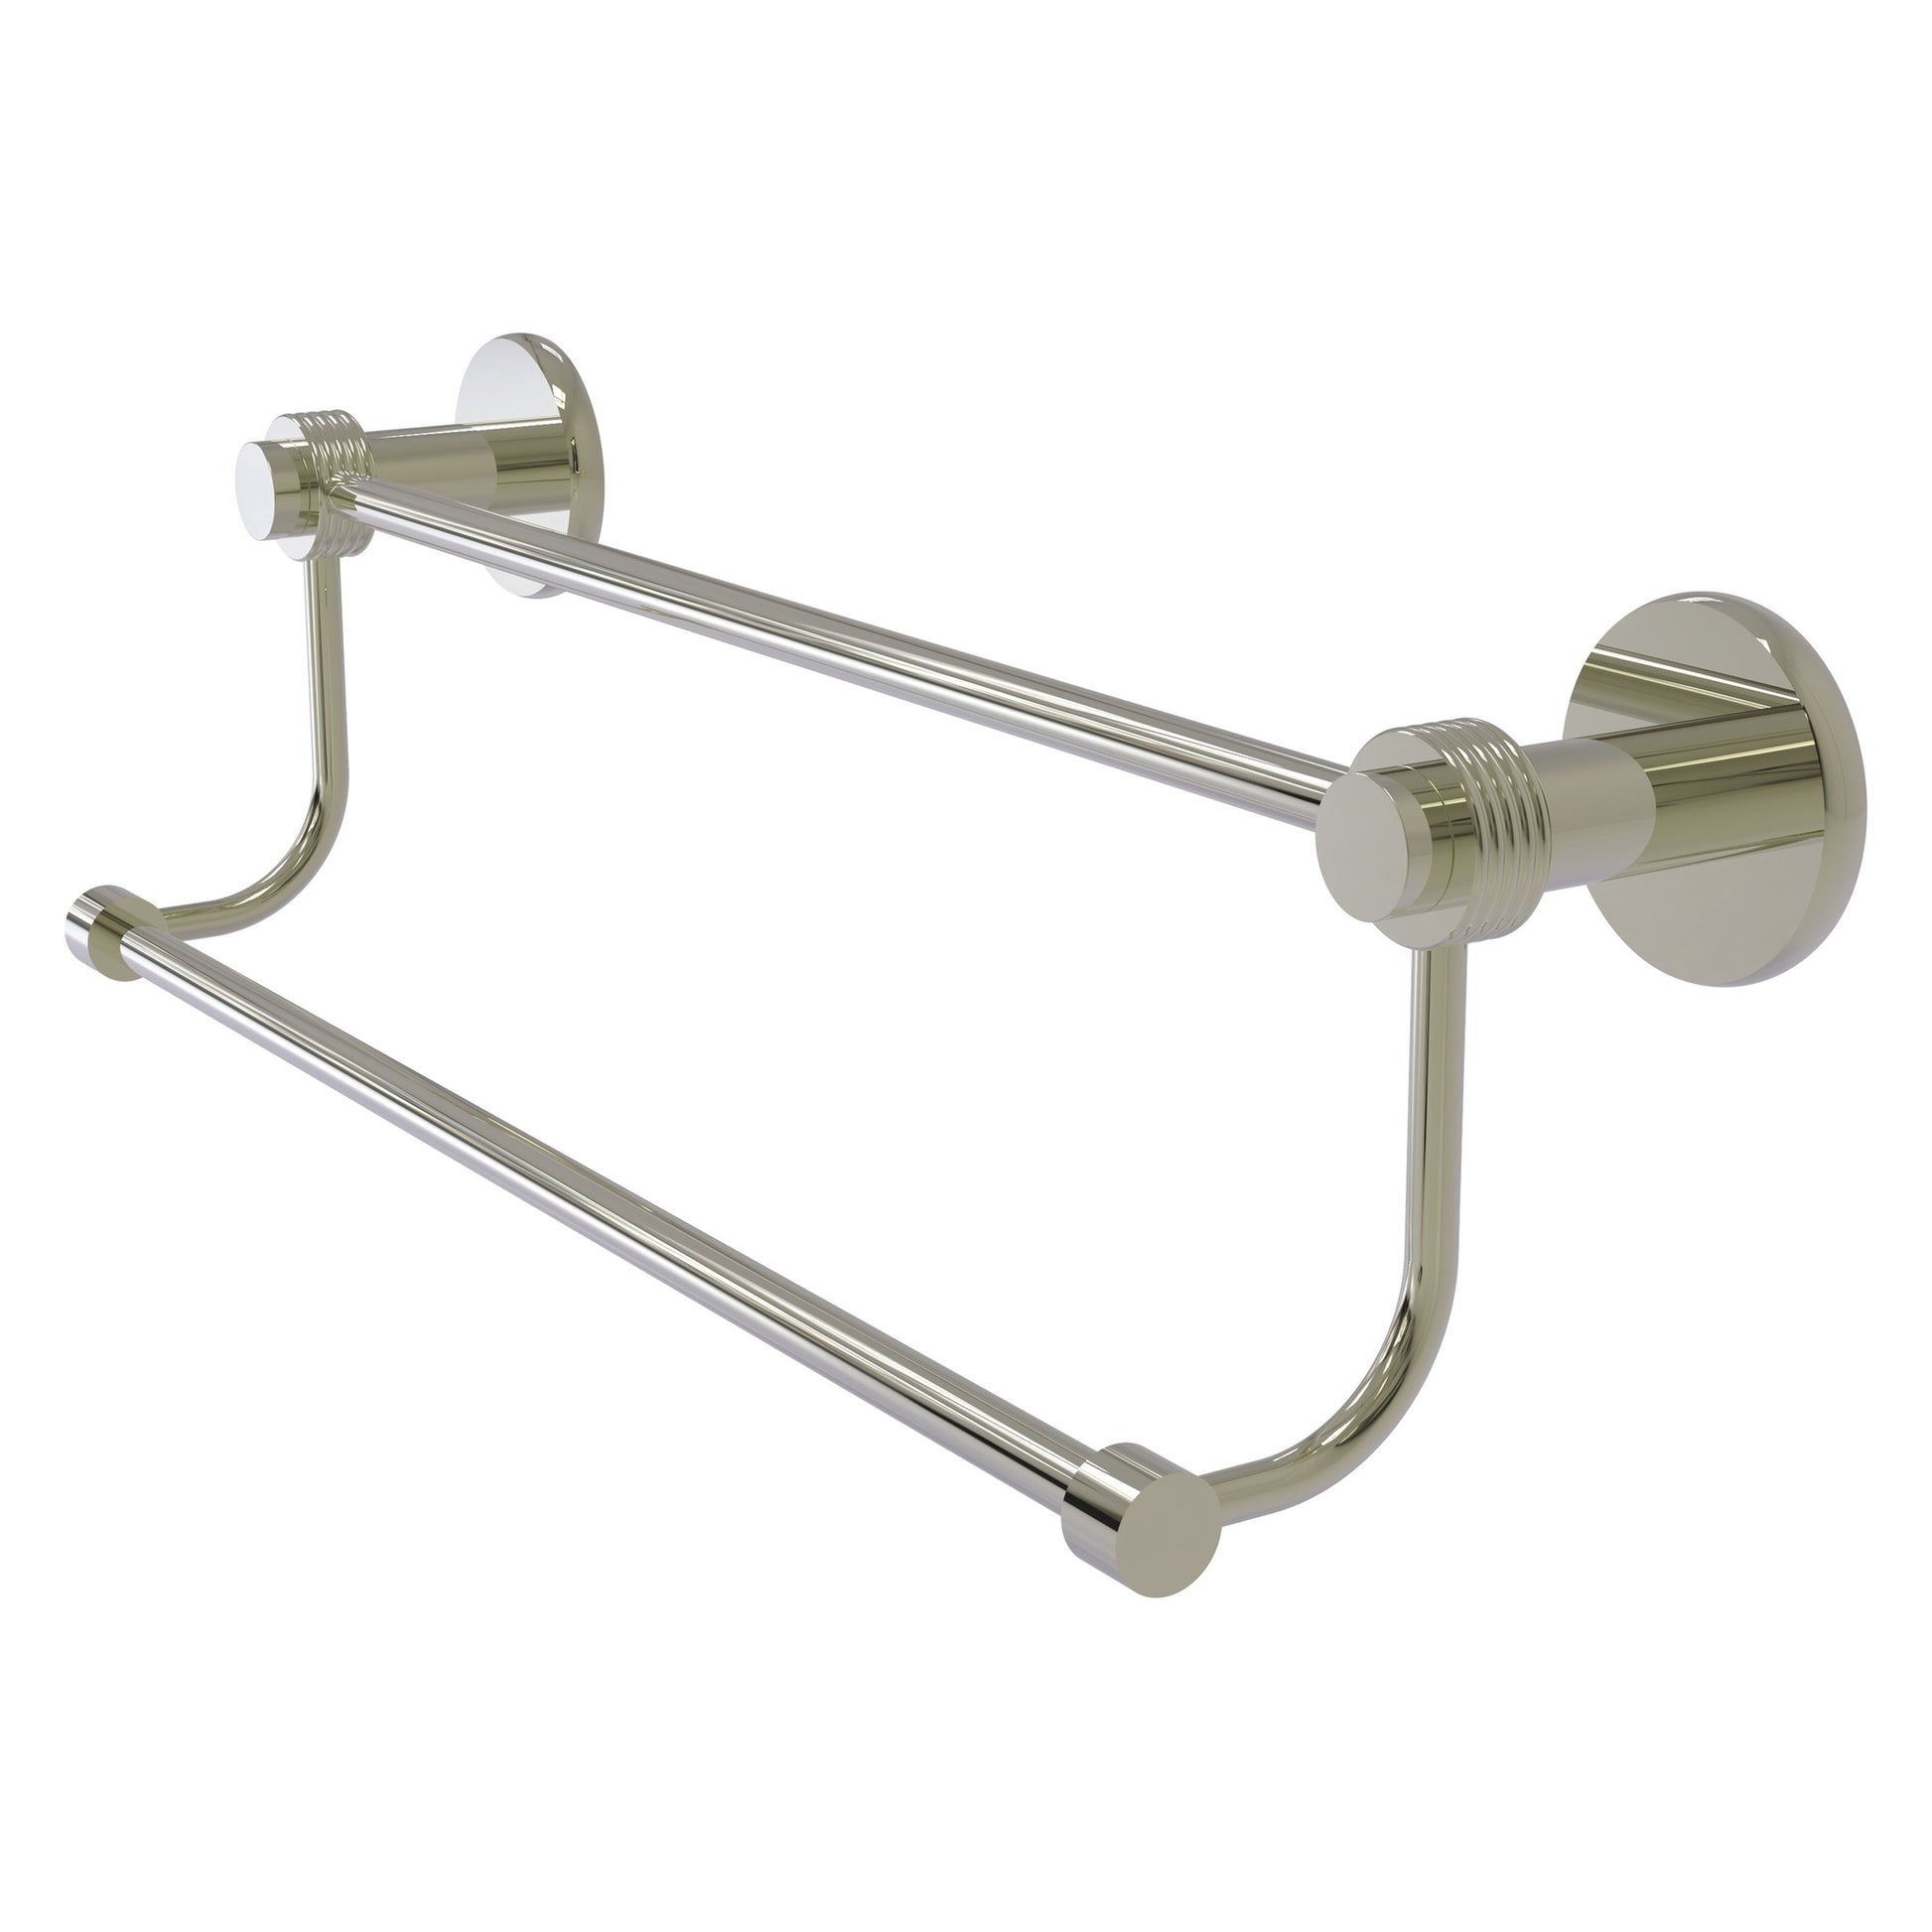 Allied Brass Mercury 24" x 26.5" Polished Nickel Solid Brass Double Towel Bar With Grooved Accents